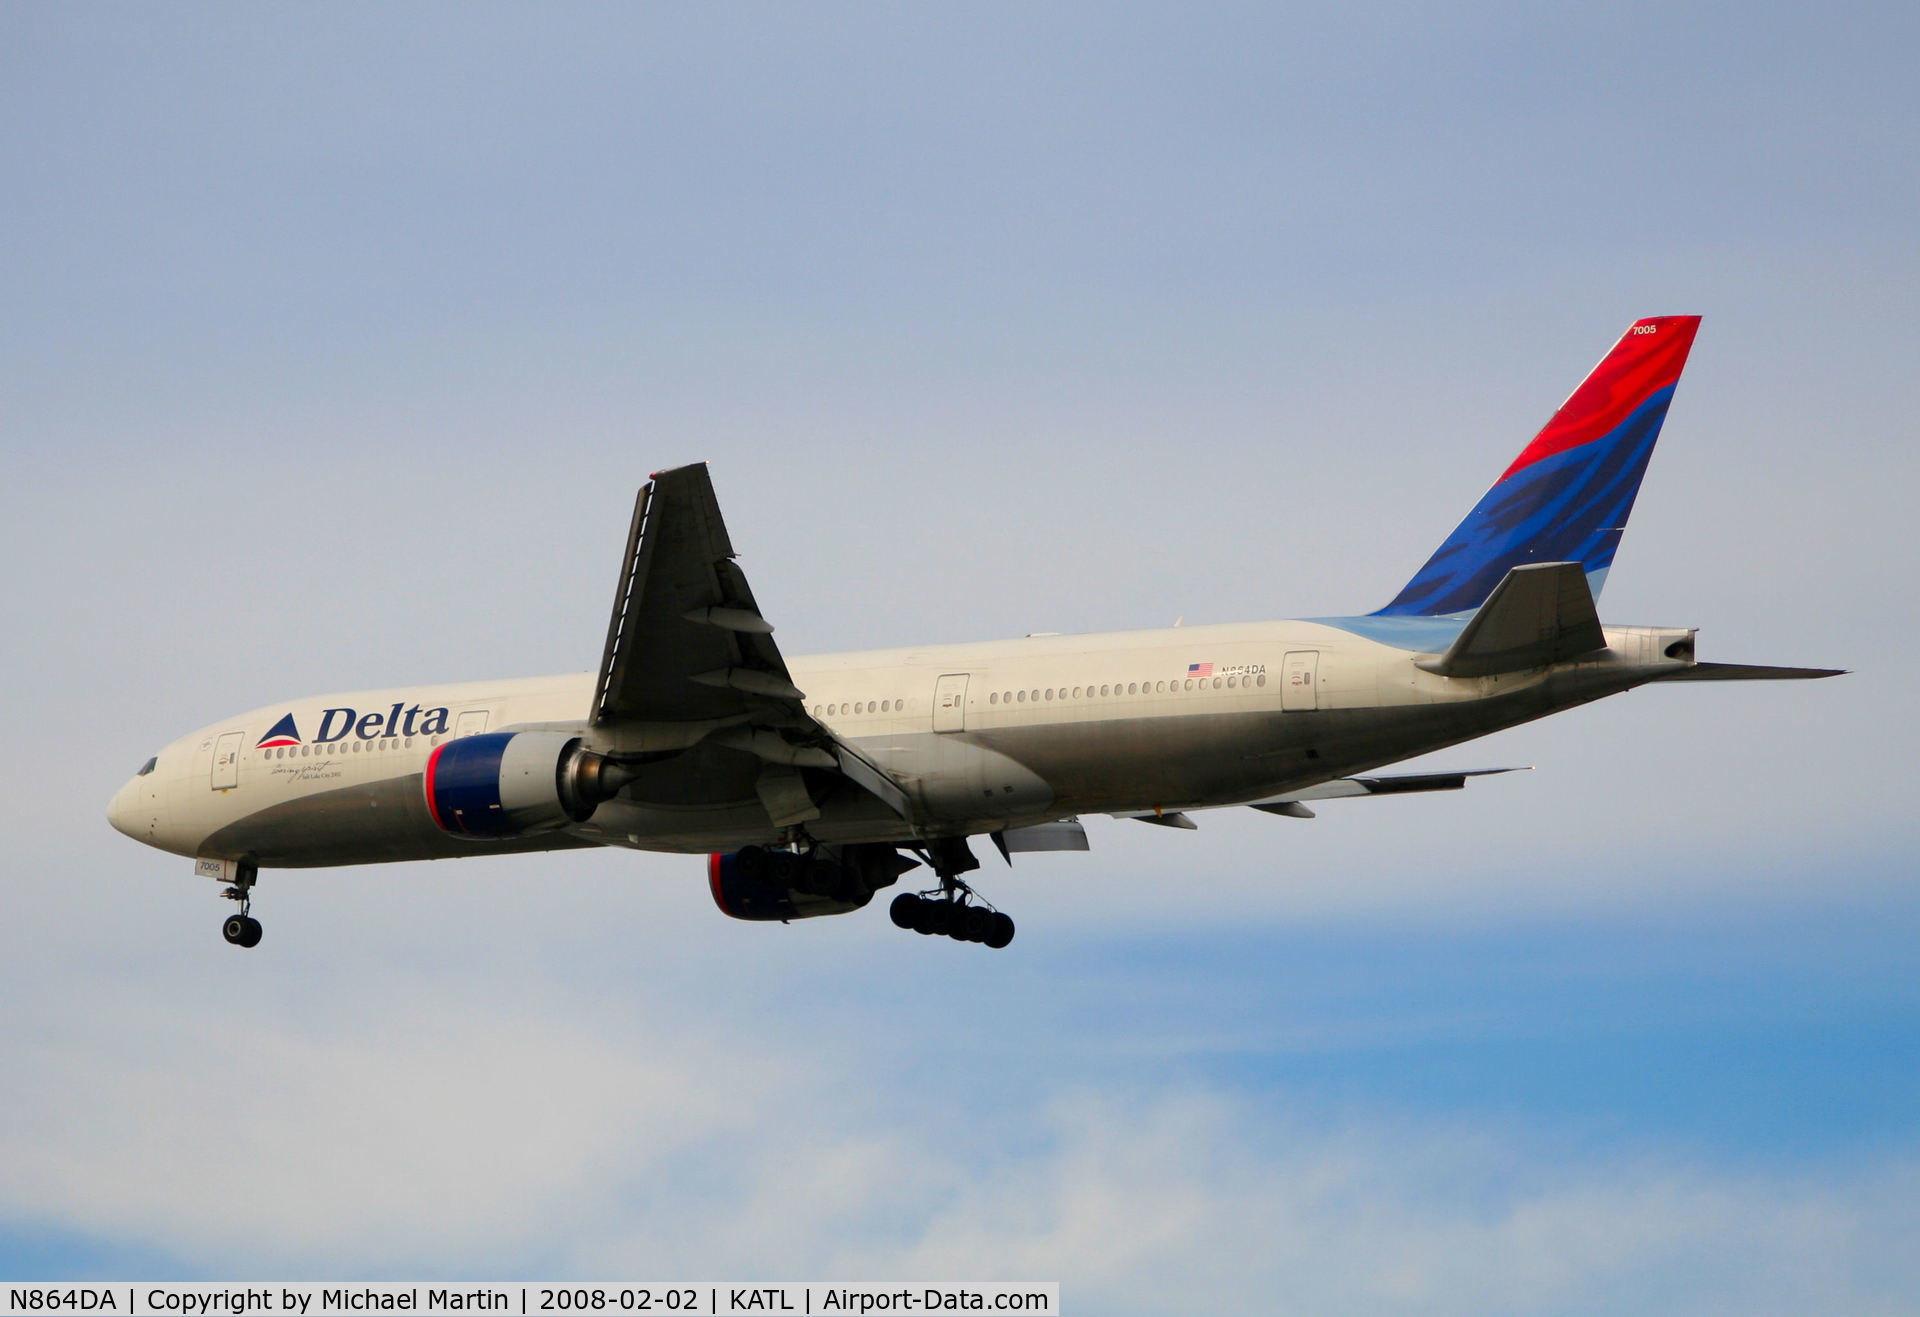 N864DA, 1999 Boeing 777-232 C/N 29736, Over the numbers of 26R